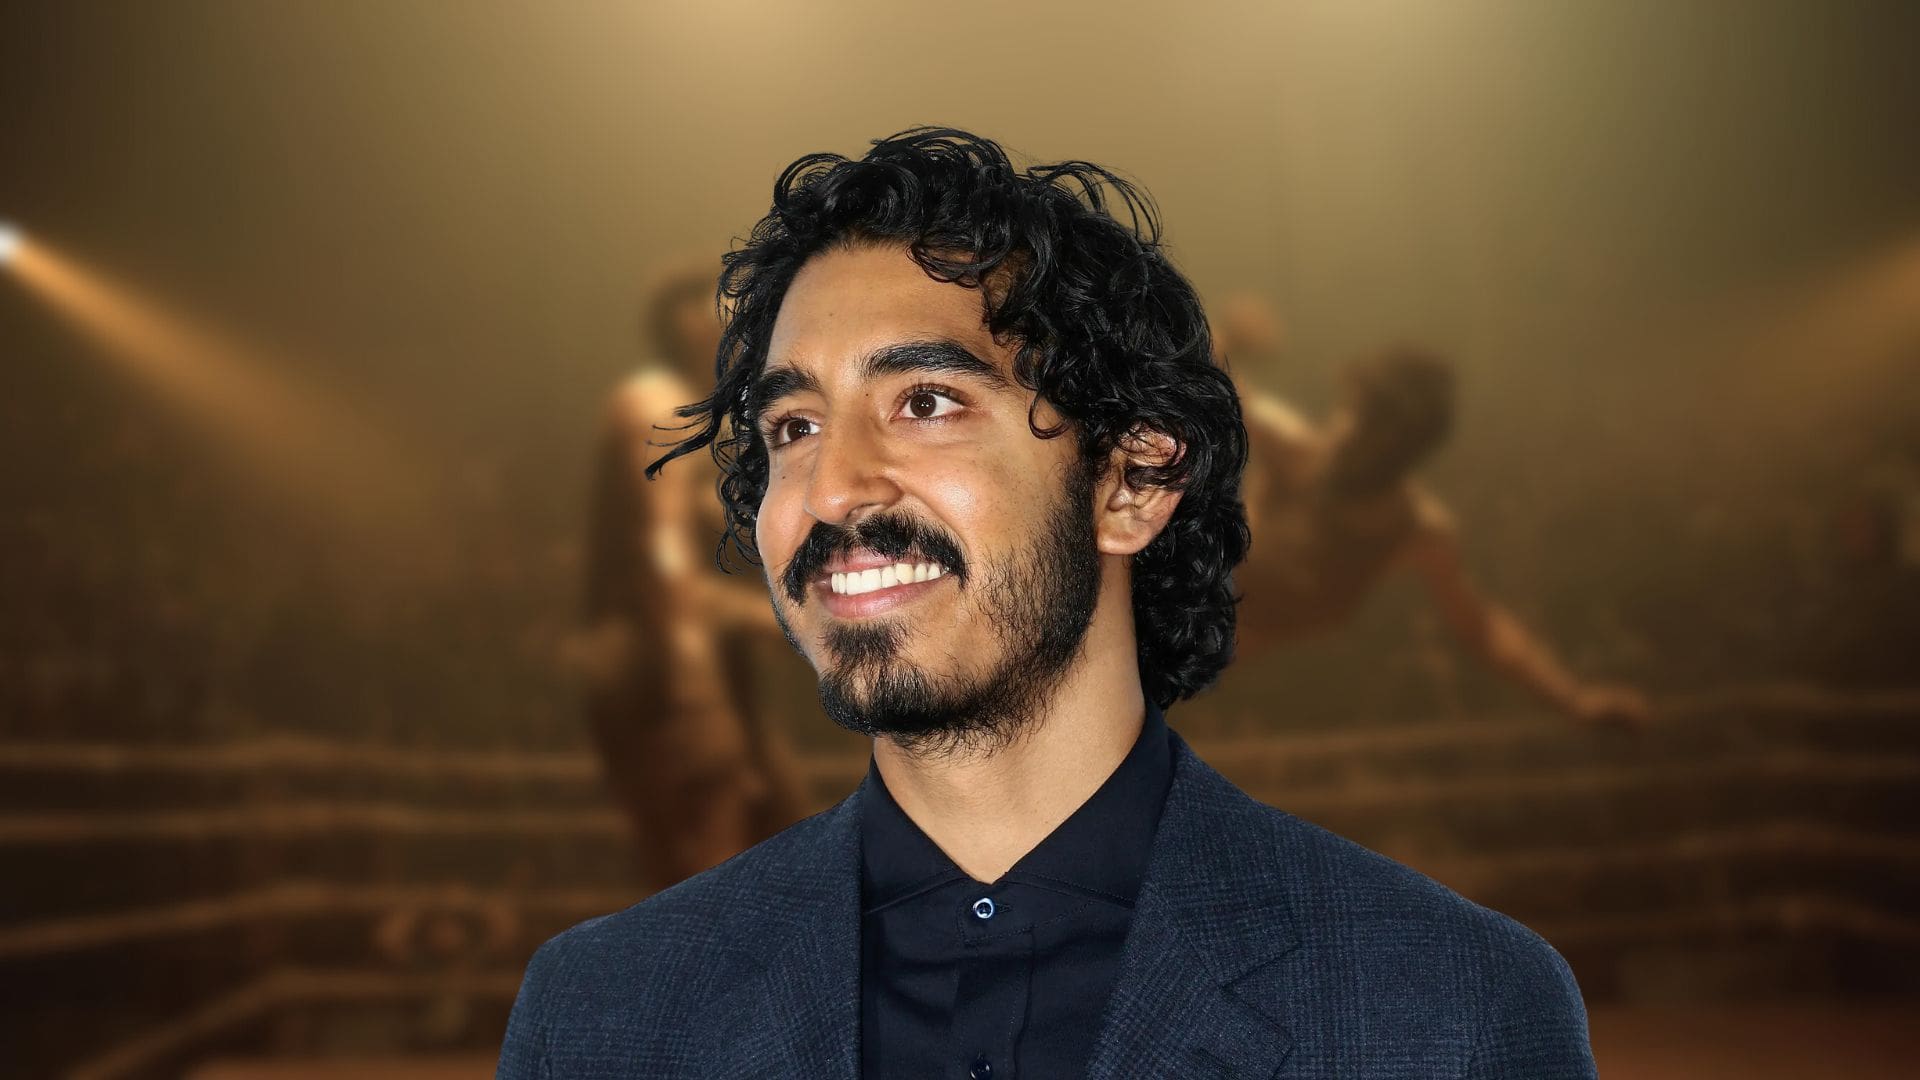 For Your Reference - Interview with “Monkey Man” Actor/Producer/Writer/Director, Dev Patel